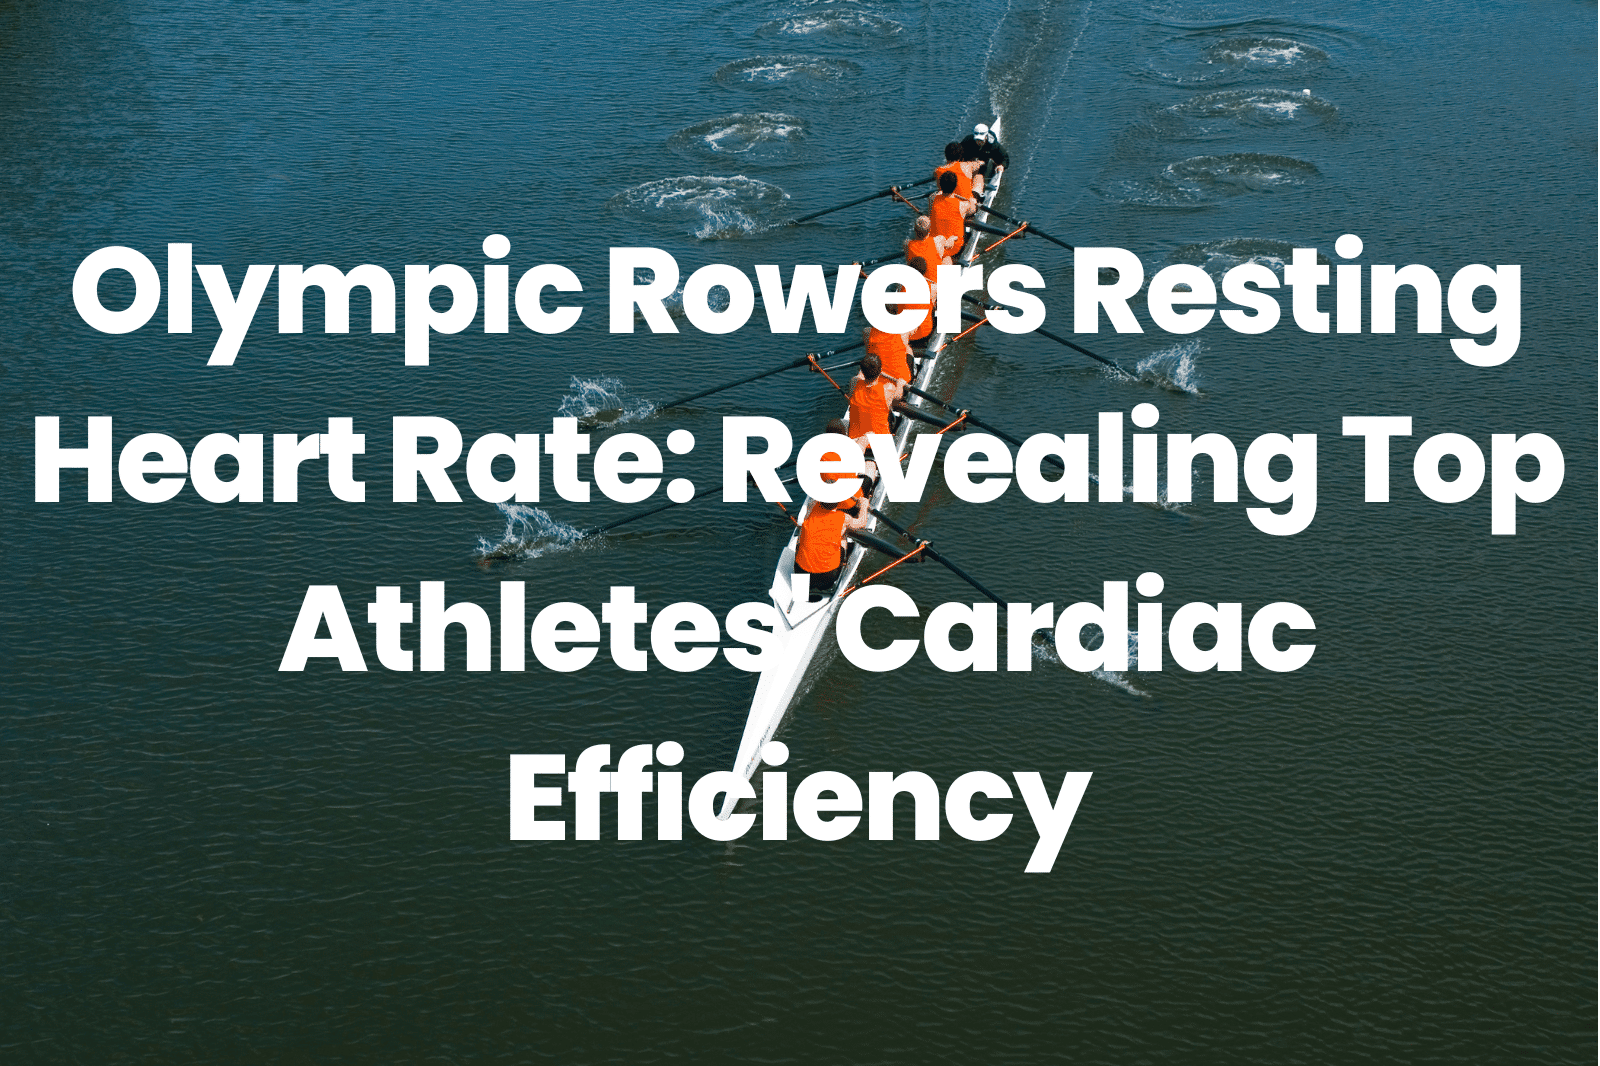 Olympic Rowers Resting Heart Rate